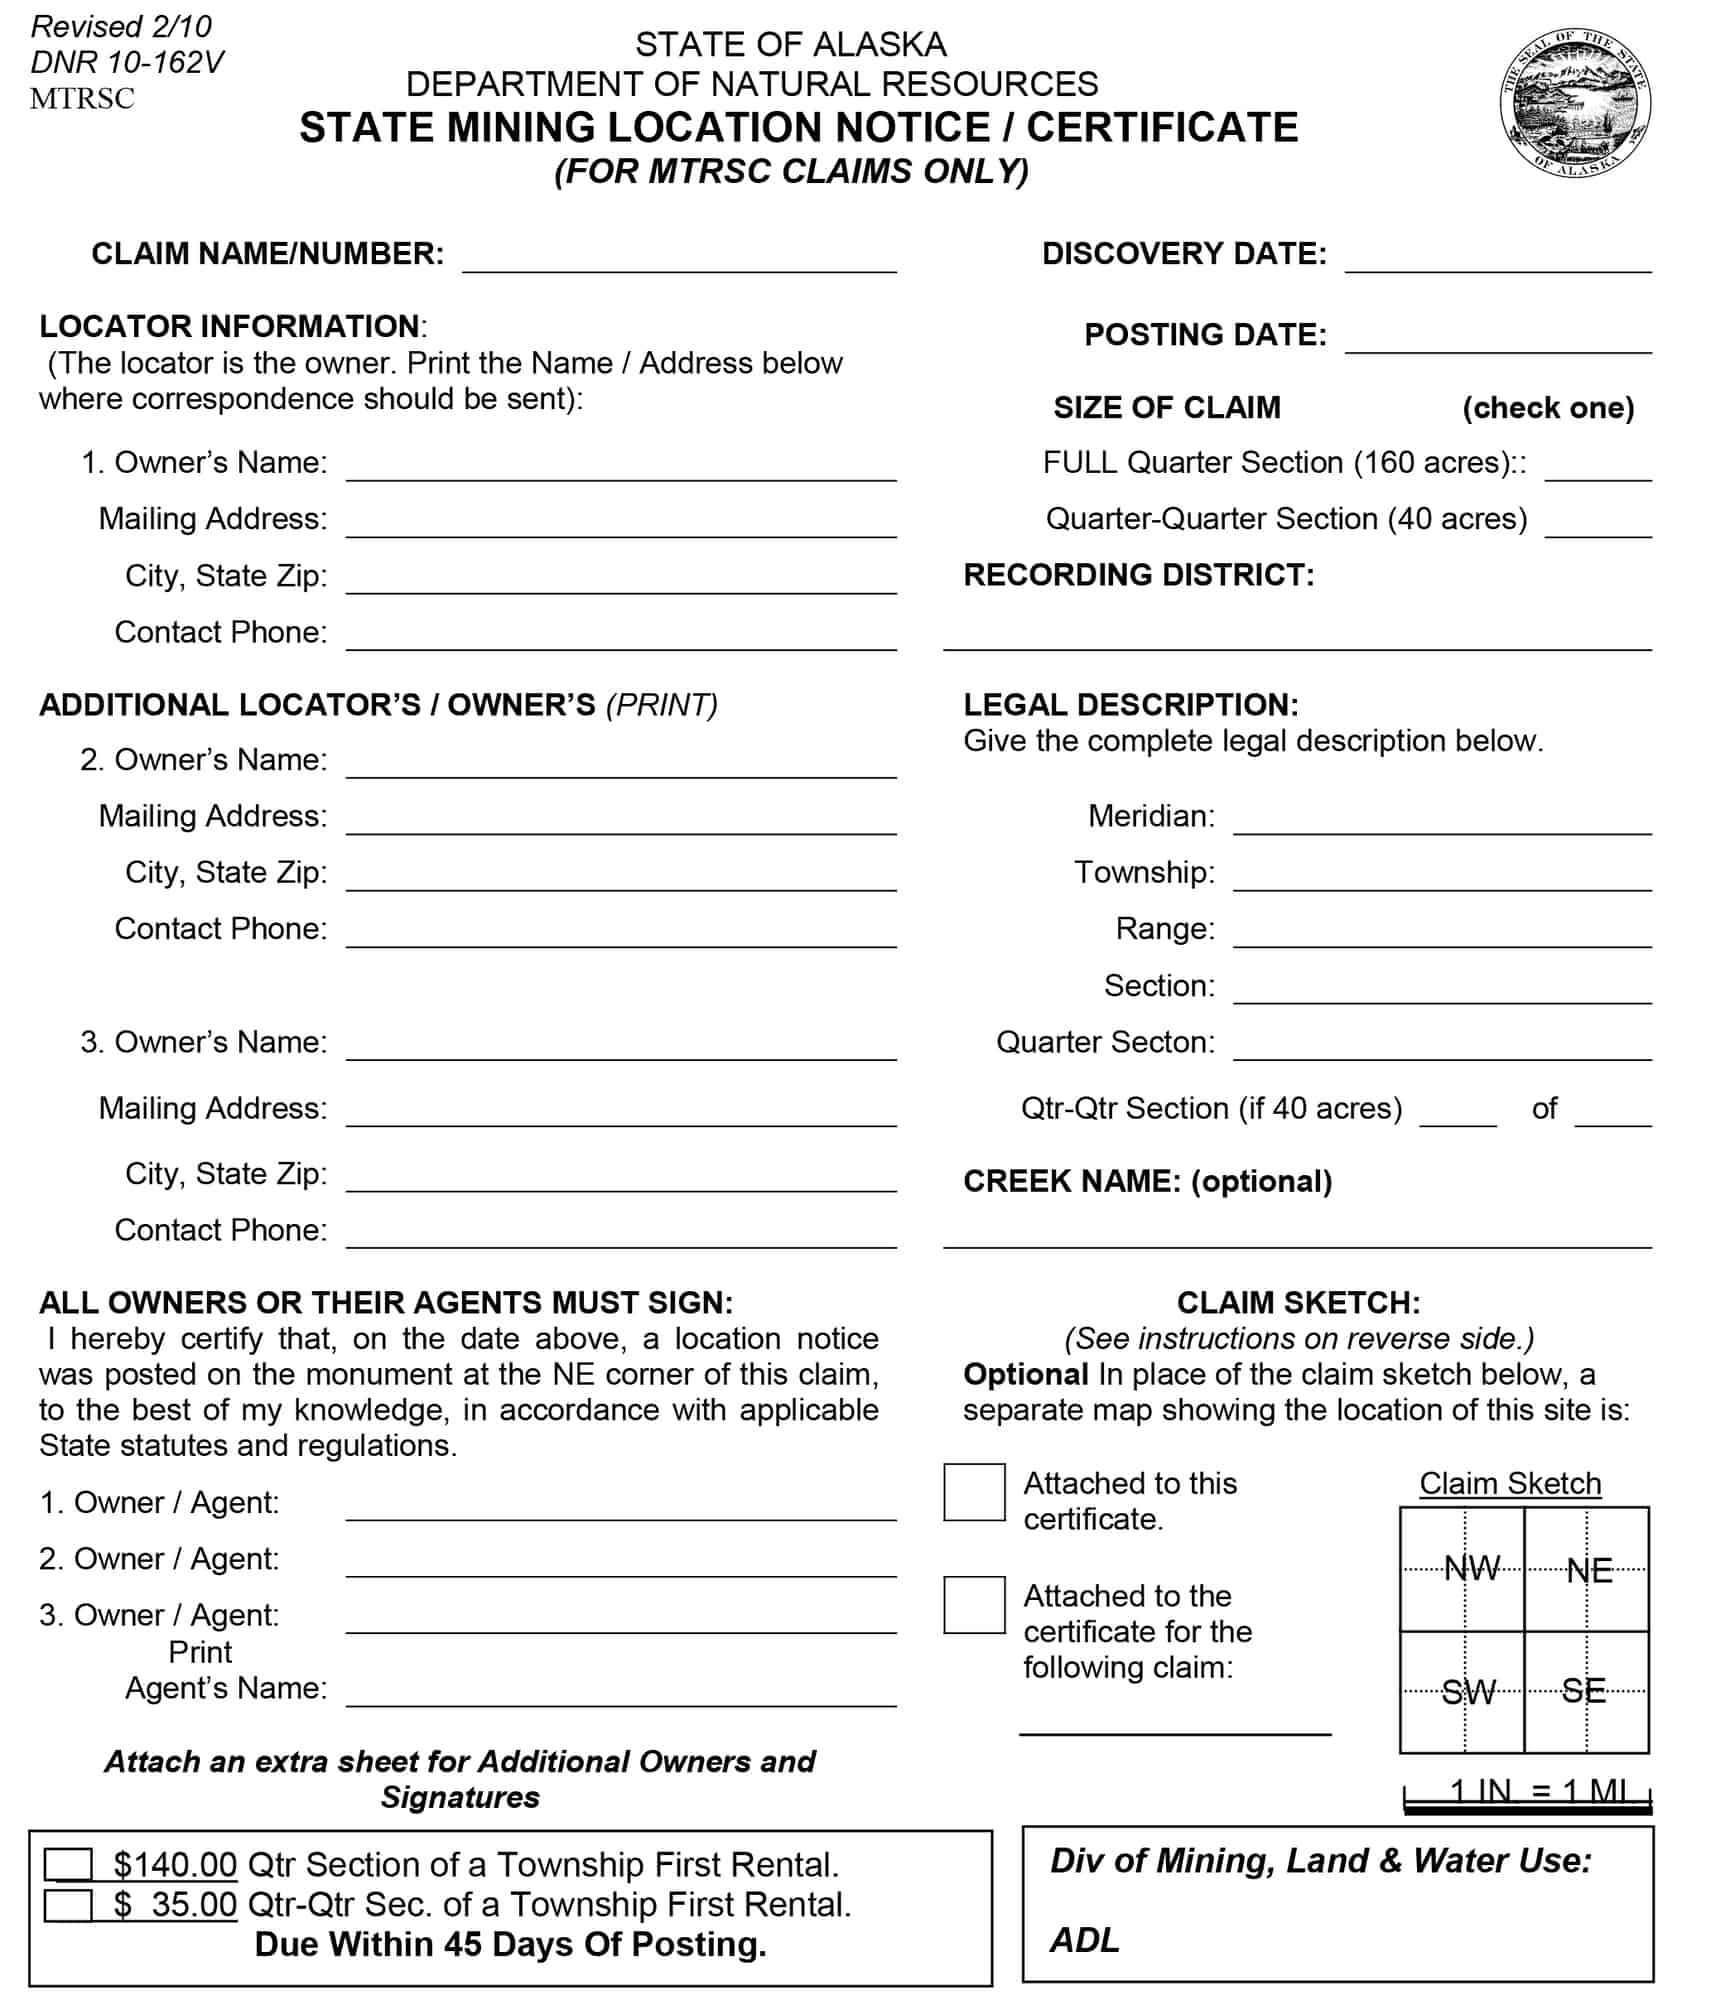 This is the claim form used to stake claims in Alaska that are located by MTRSC